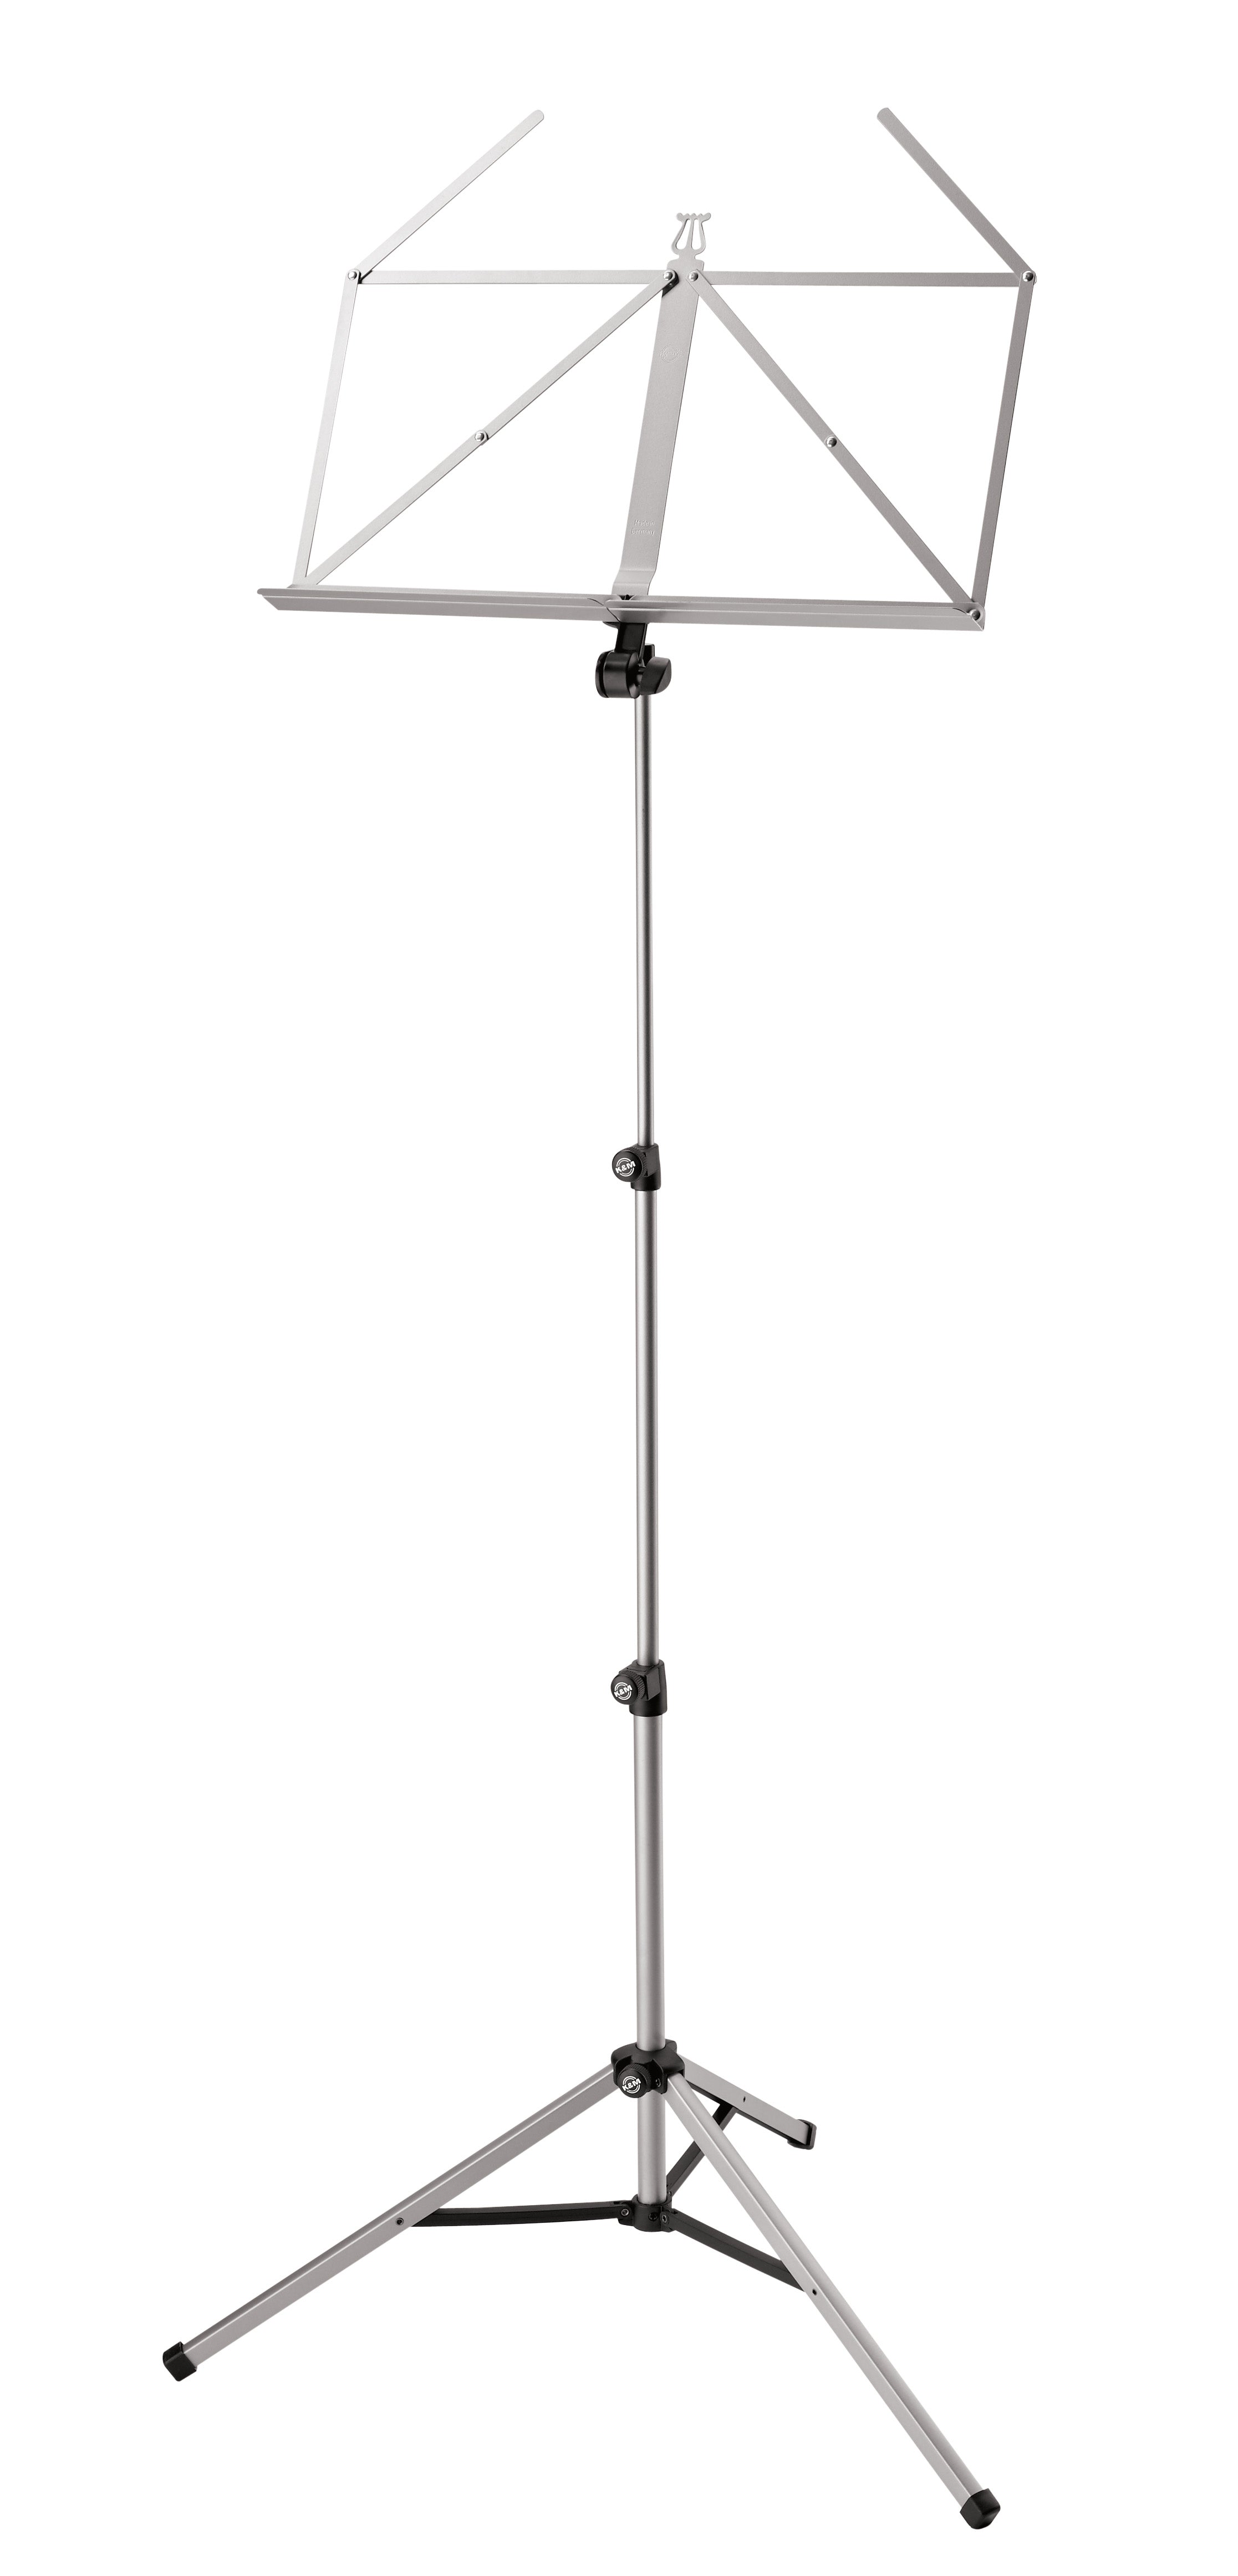 K&M #10065 Folding Music Stand, Nickel-coated